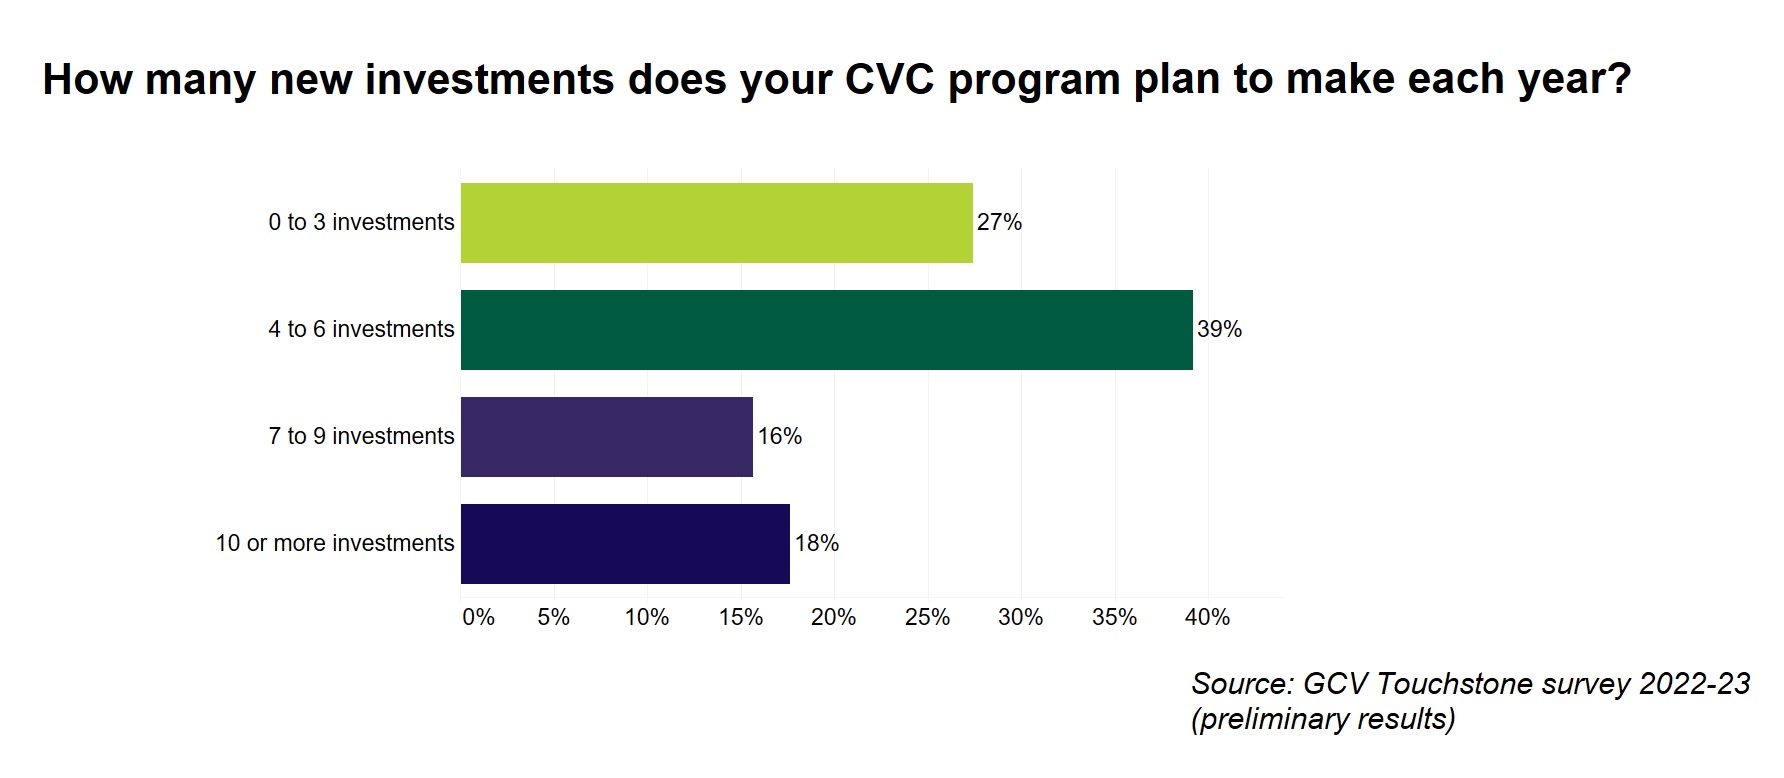 Chart showing the number of planned investments per year by CVC programs